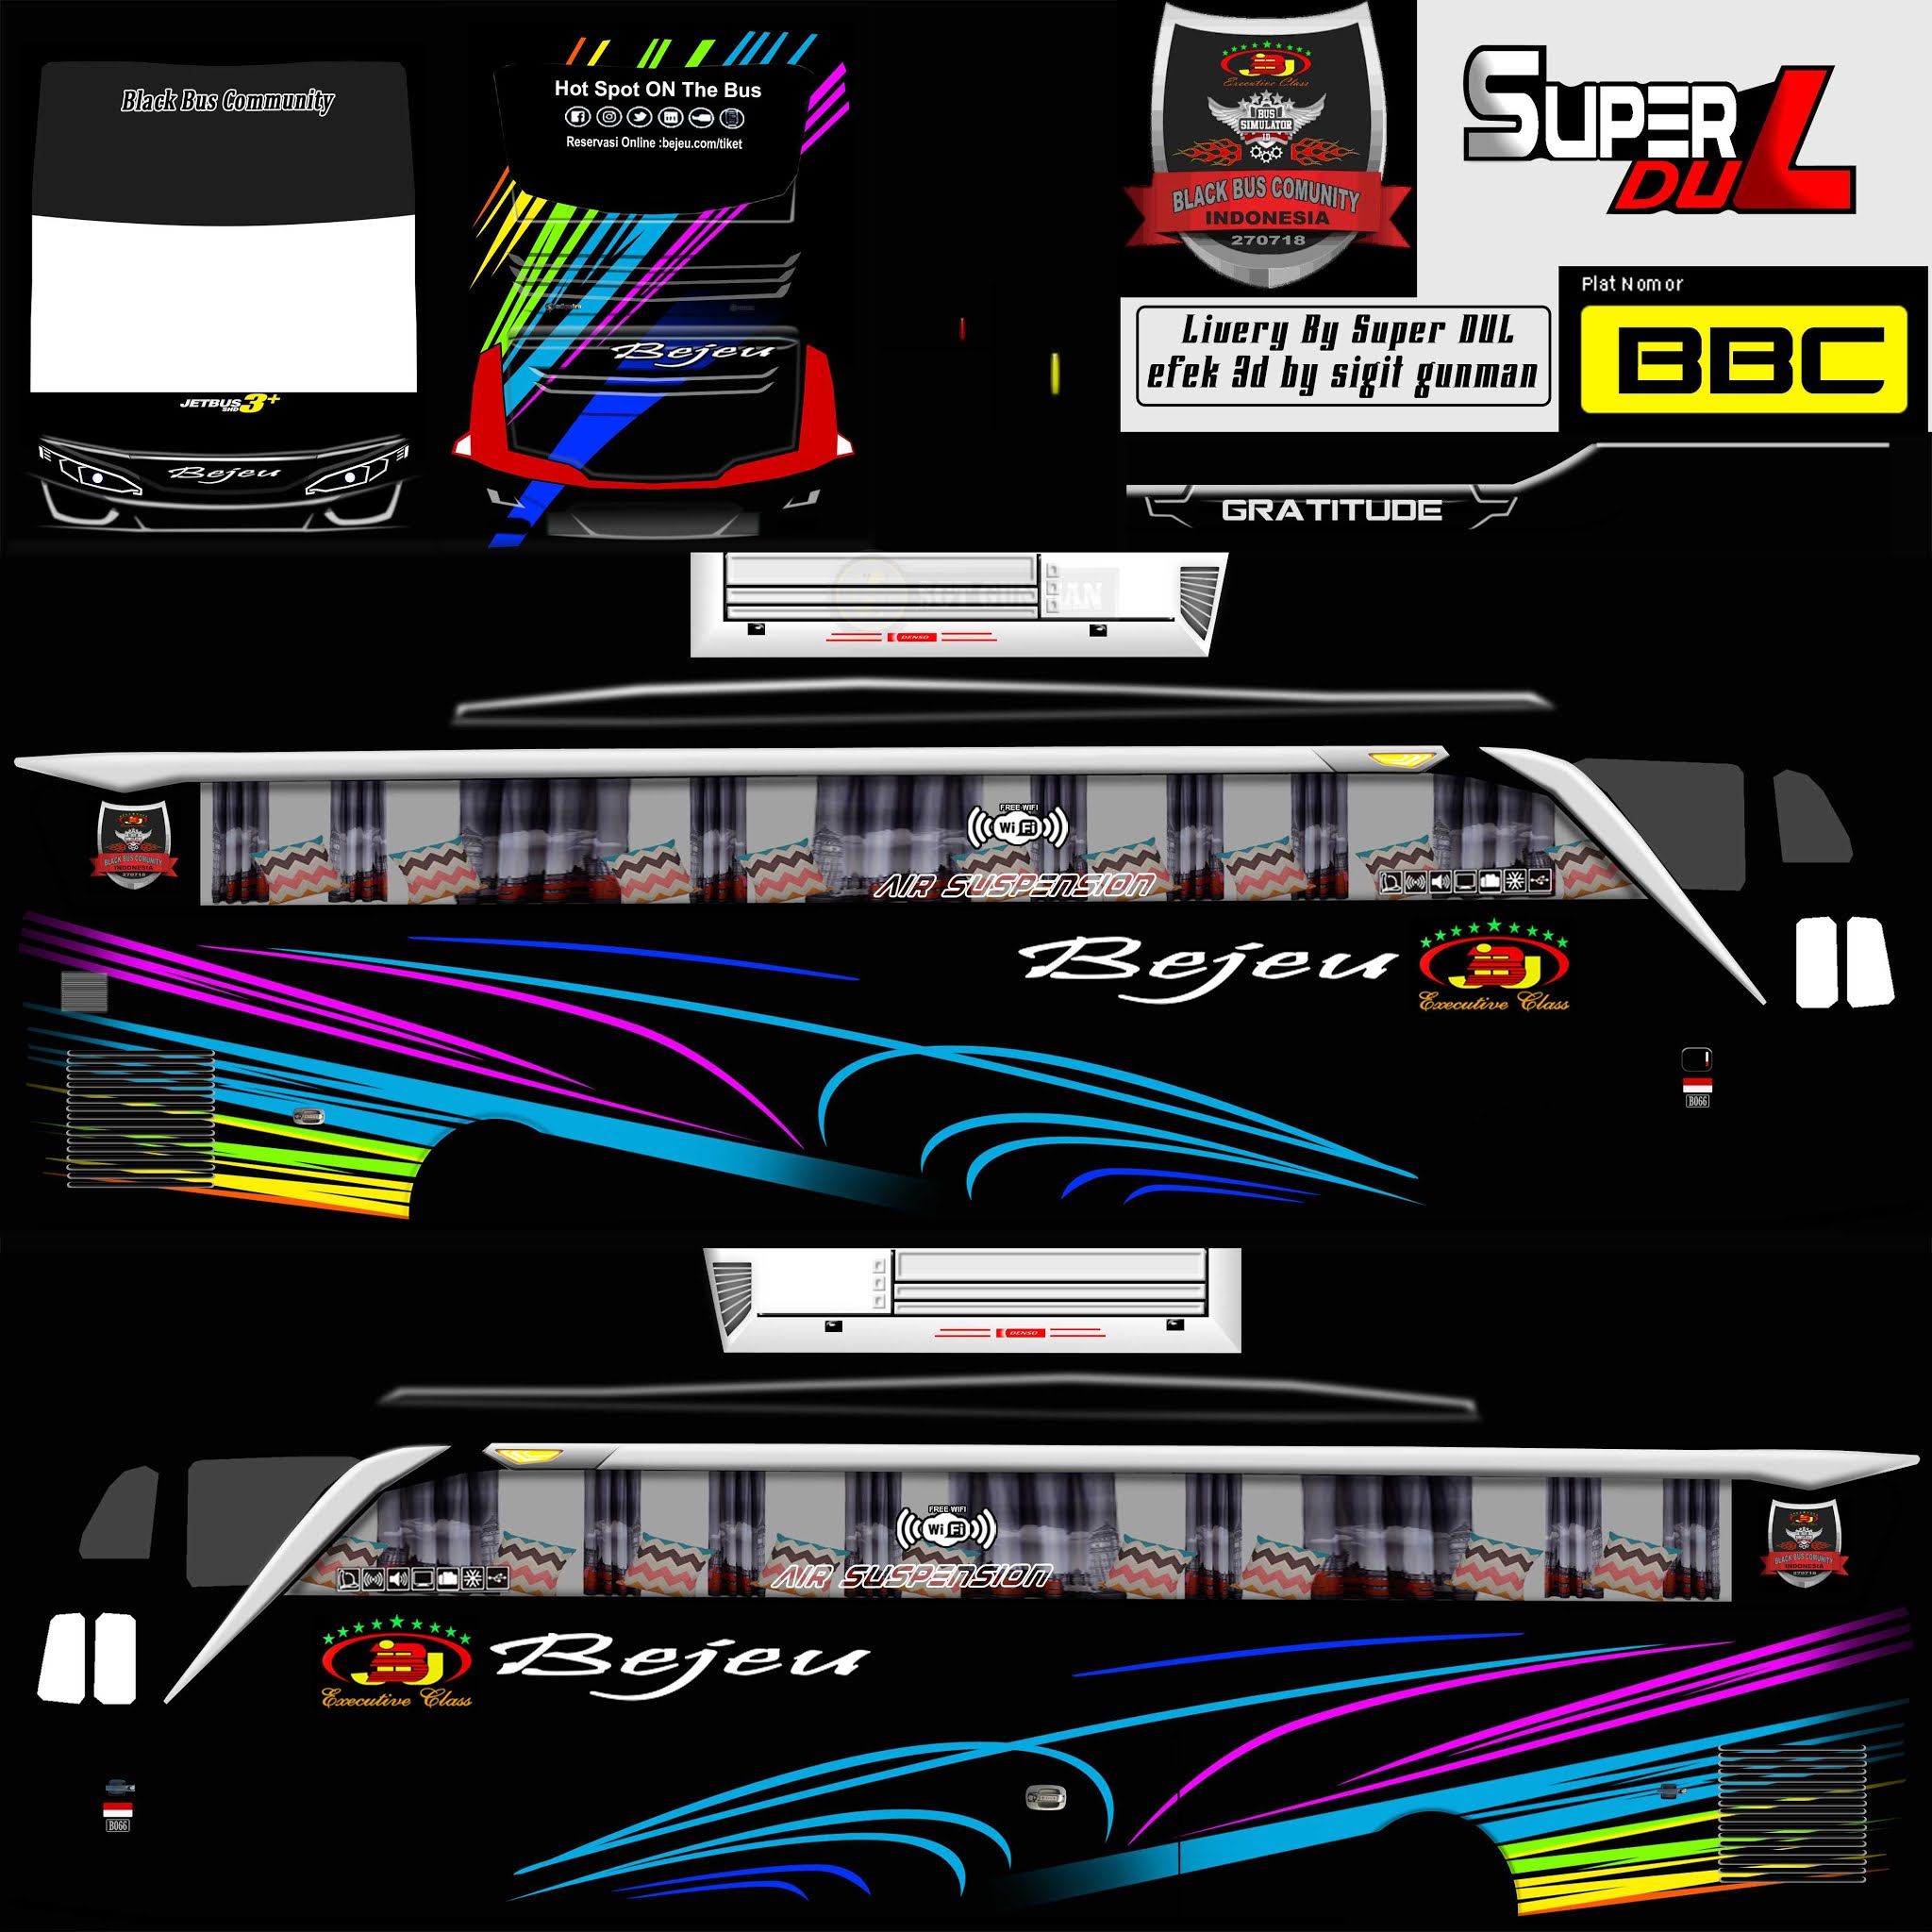 Nakula Shd Bus Livery Download Livery Png Images Livery Clipart Free 